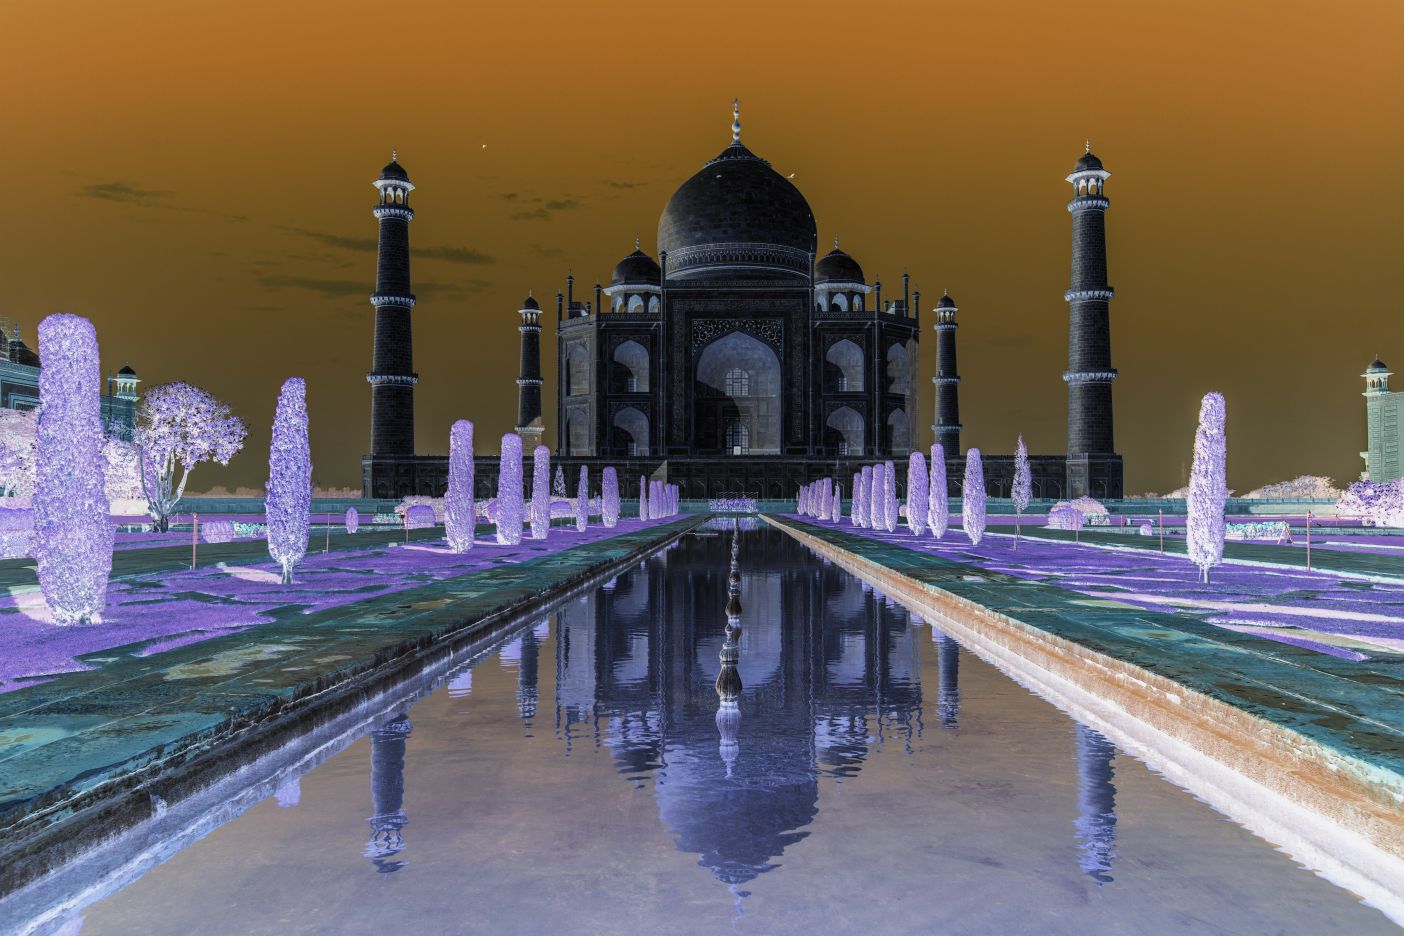 A picture of the Taj Mahal in India appears with the building in dark gray and black, the sky is orange, the small trees lining the rectangular pond that leads to the building are purple, and the sidewalks appear blue-green.  A start timer button appears below the image. once 20 second timer has expired an aferimage of taj mahal picture over a black and white image version same there to be color on with green bushes, yellow grass, red-orange brick sidewalks, blue sky.